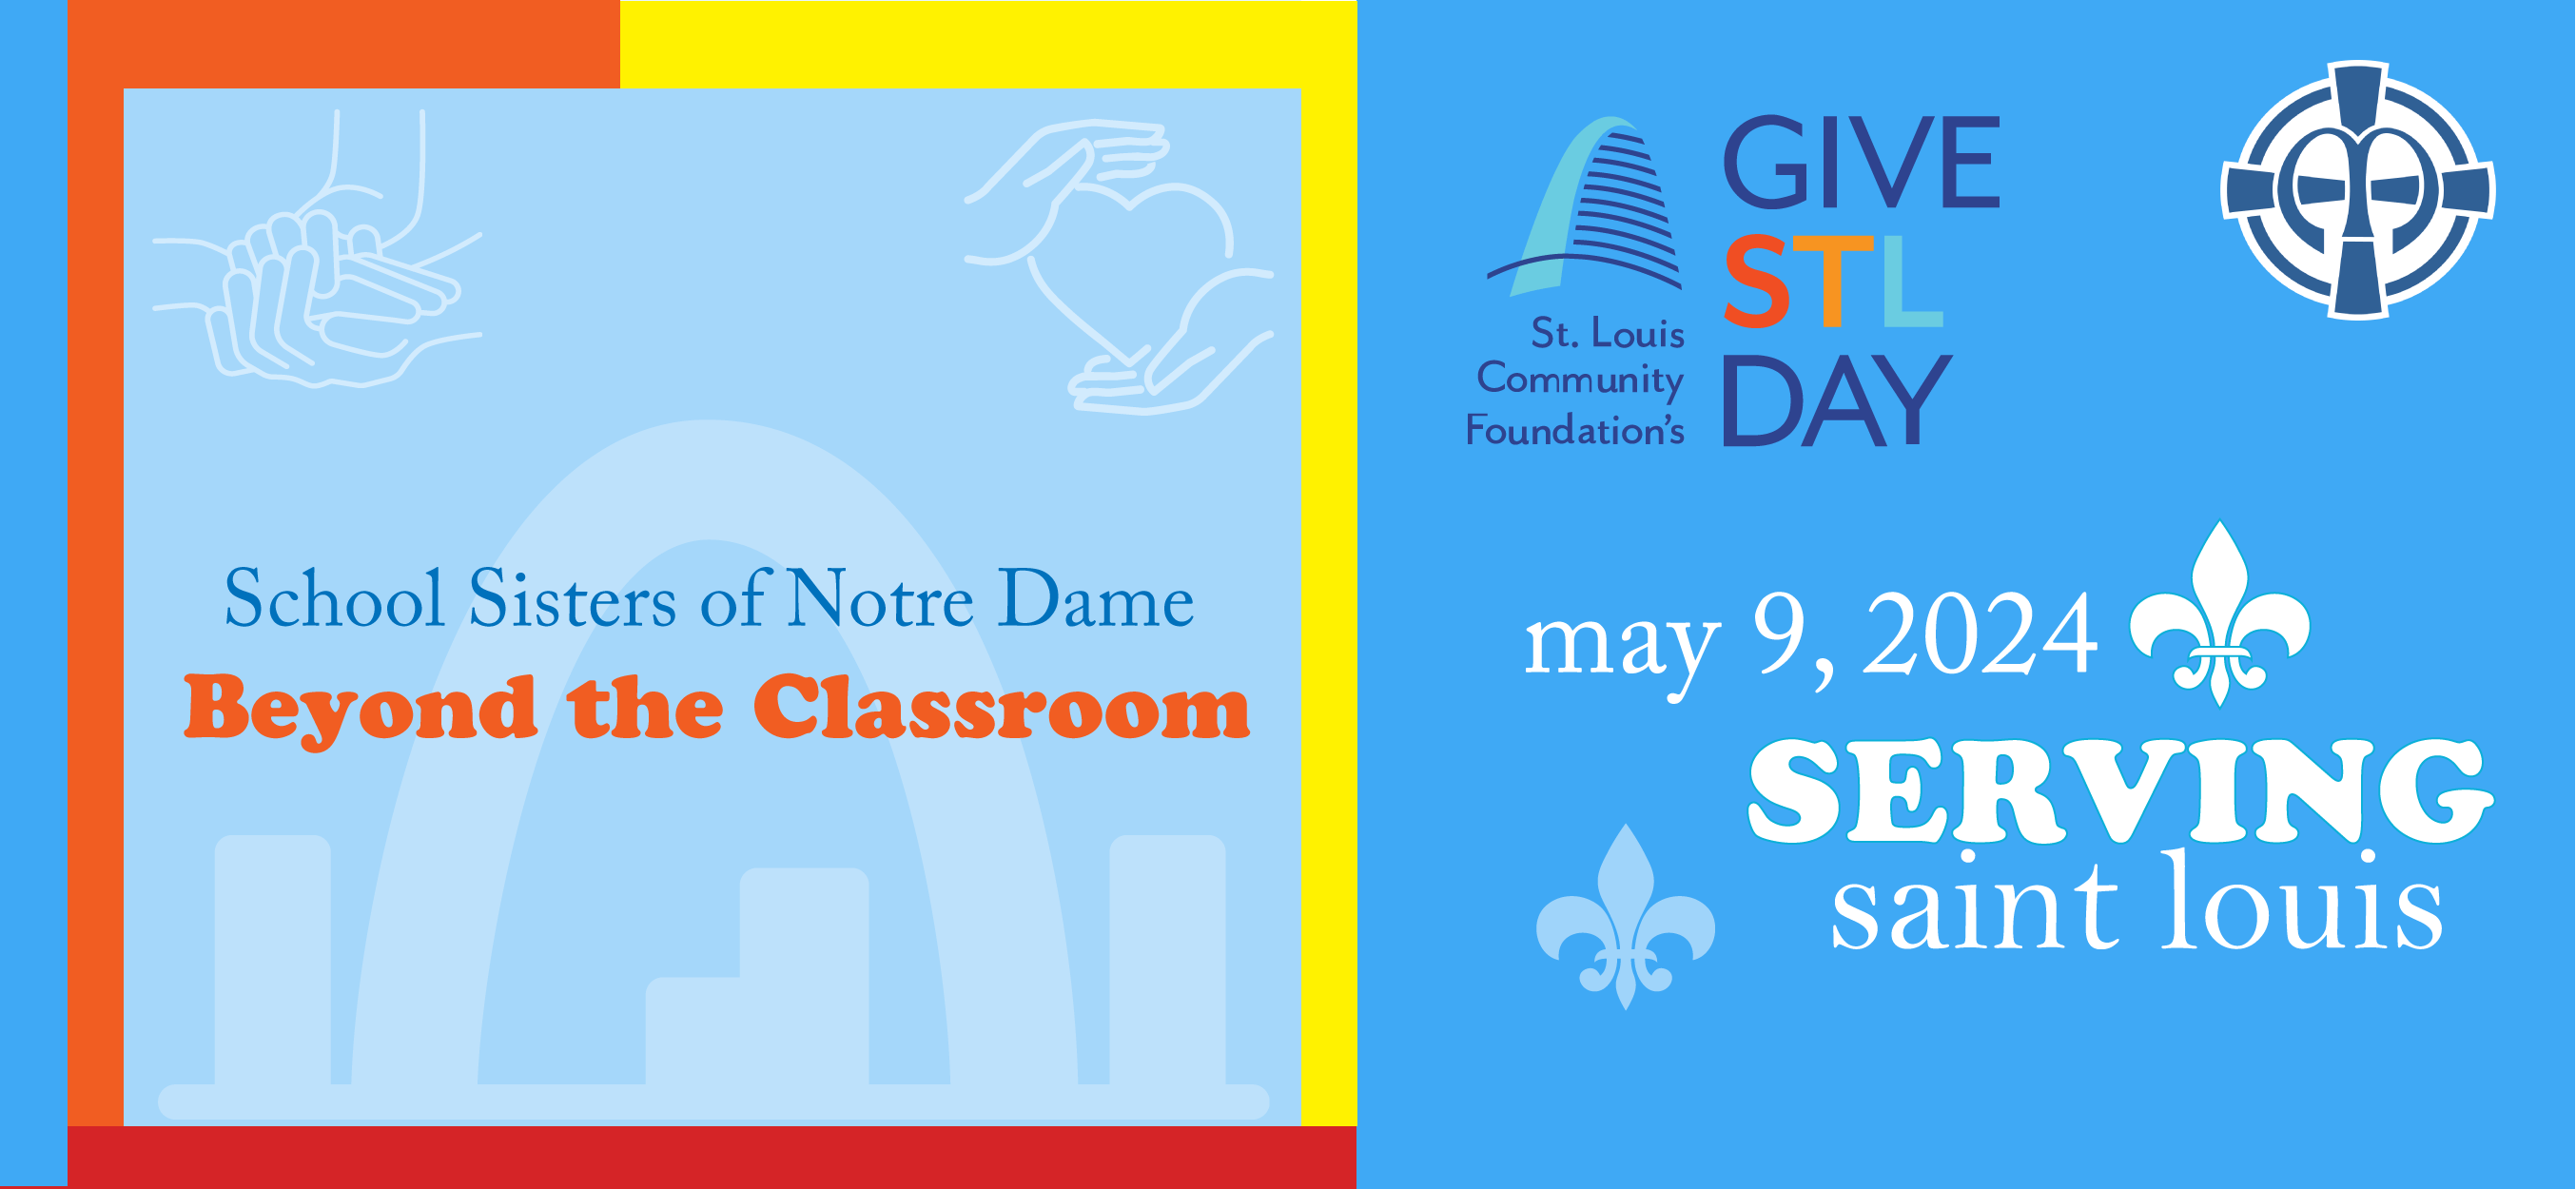 Give St. Louis day web image.